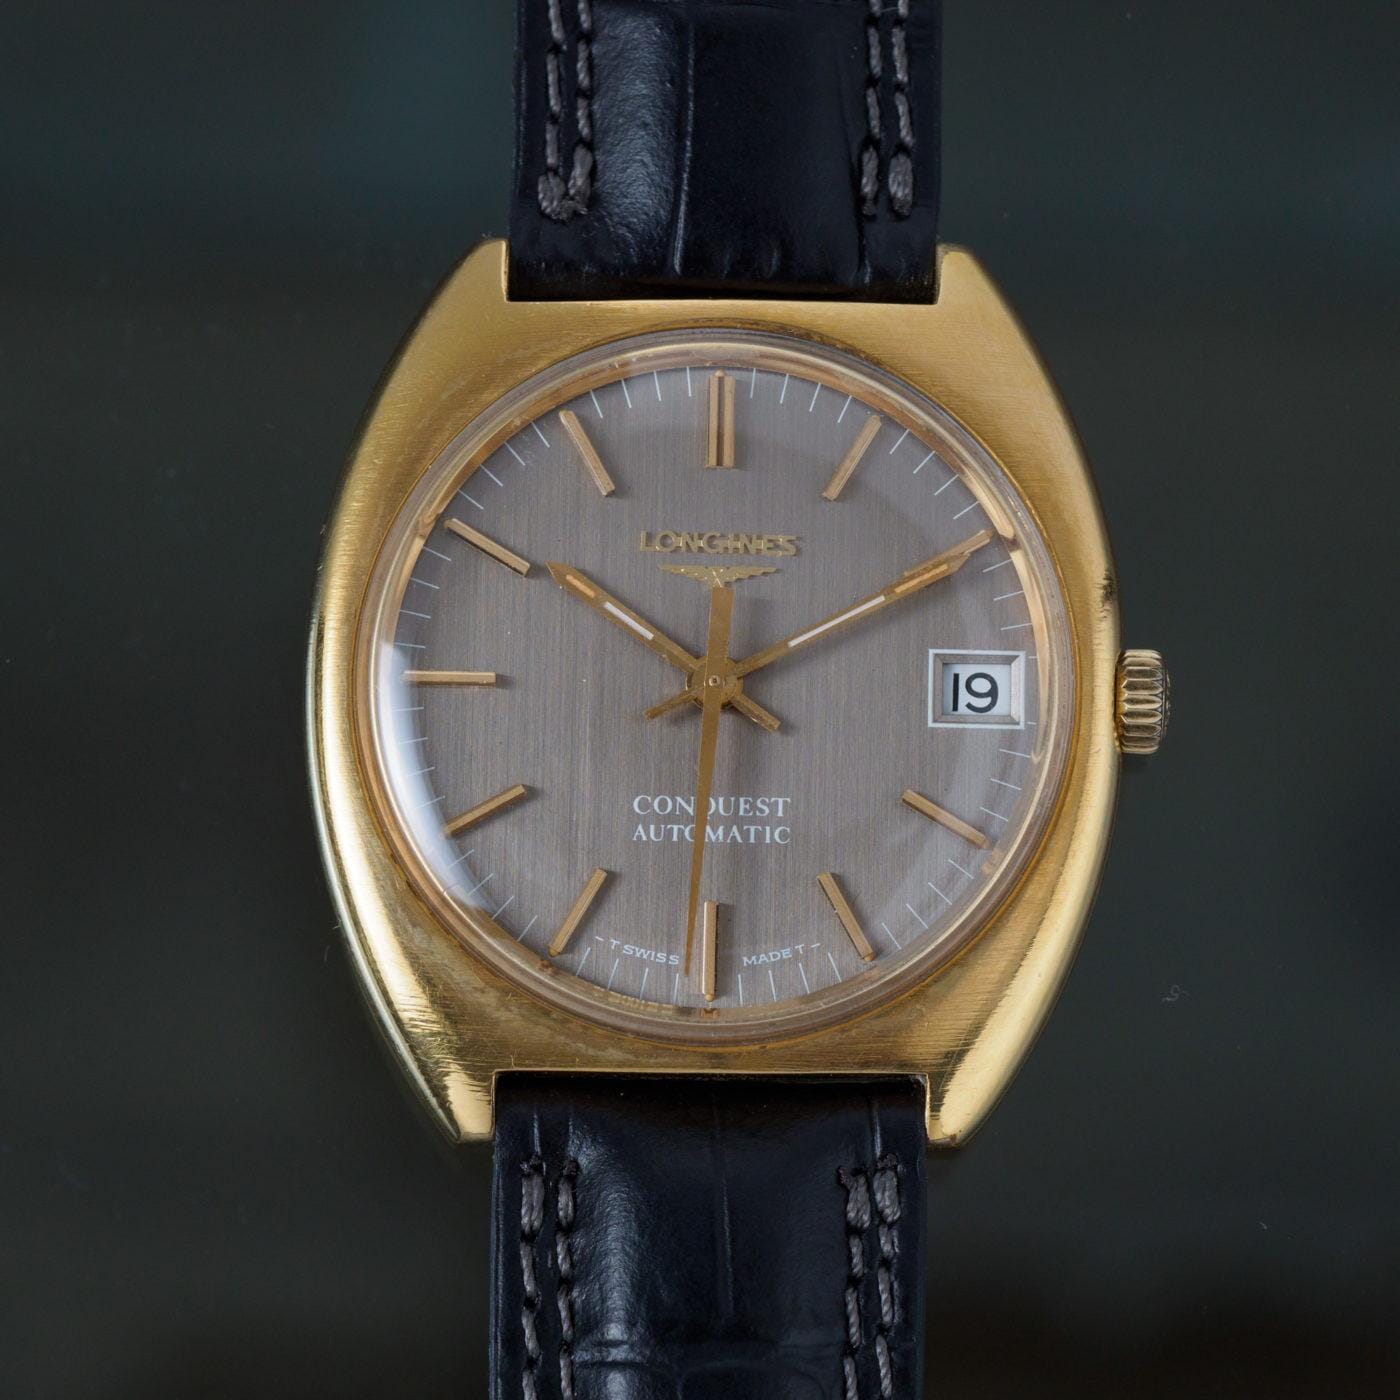 Vacheron Constantin 33201P Tank YG Onyx Dial with Extract from Archives